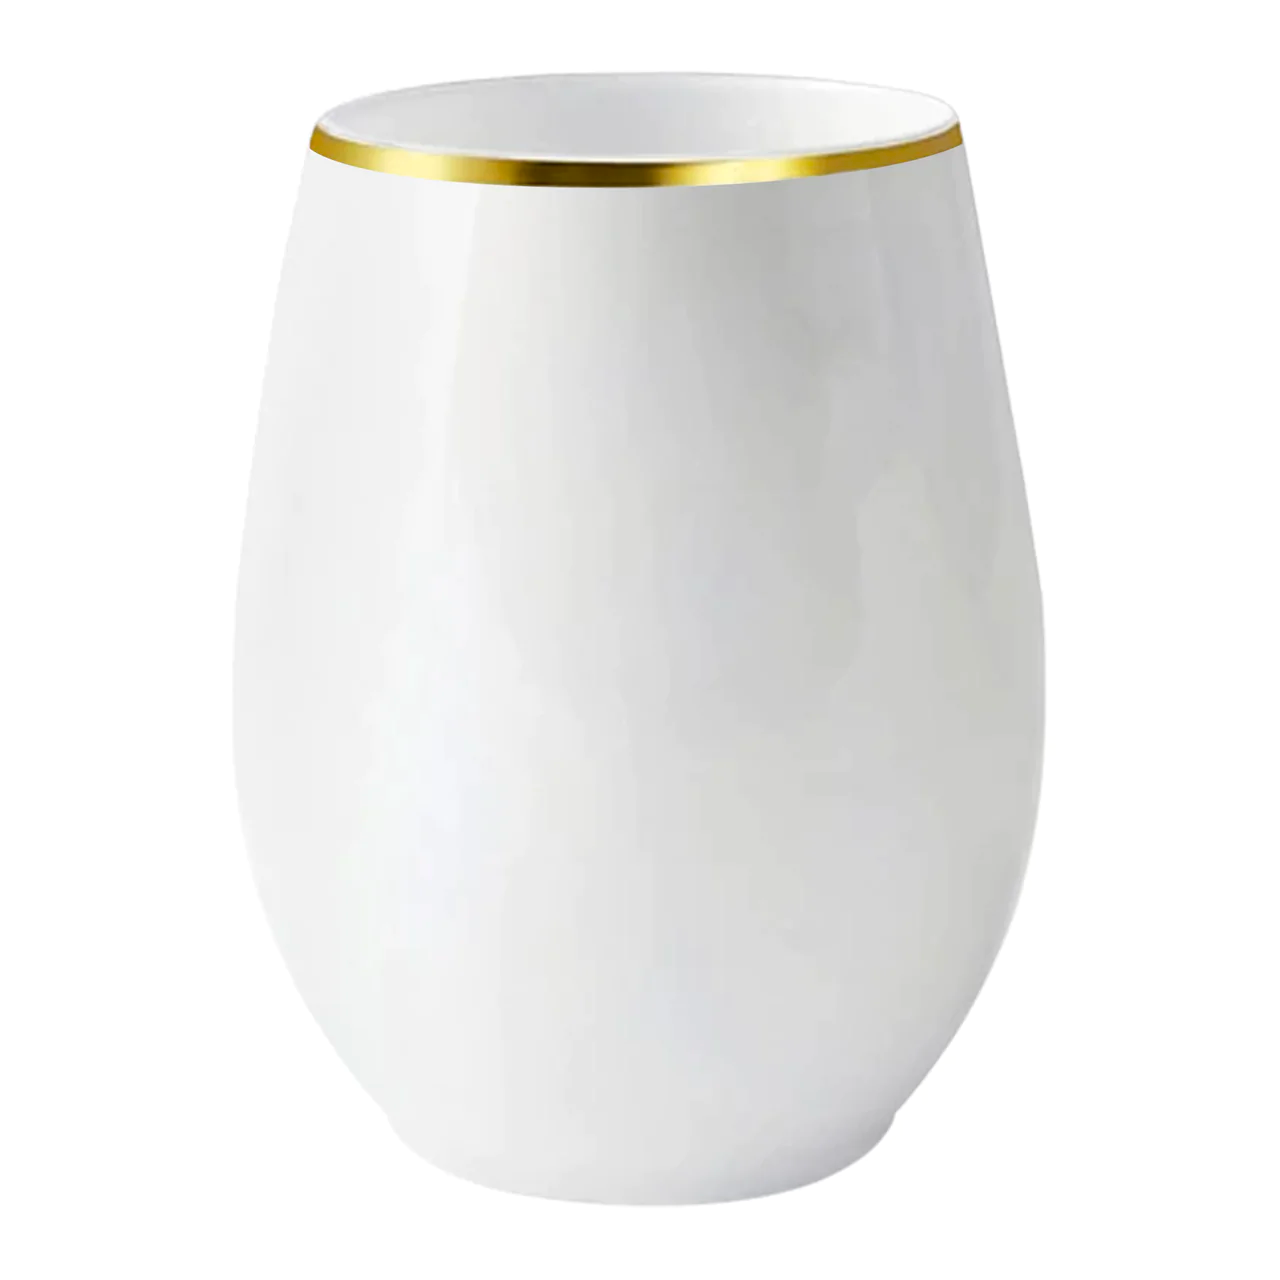 12 oz. Elegant Stemless Plastic Wine Glasses - White with Gold Rim (16 Count) - Set With Style